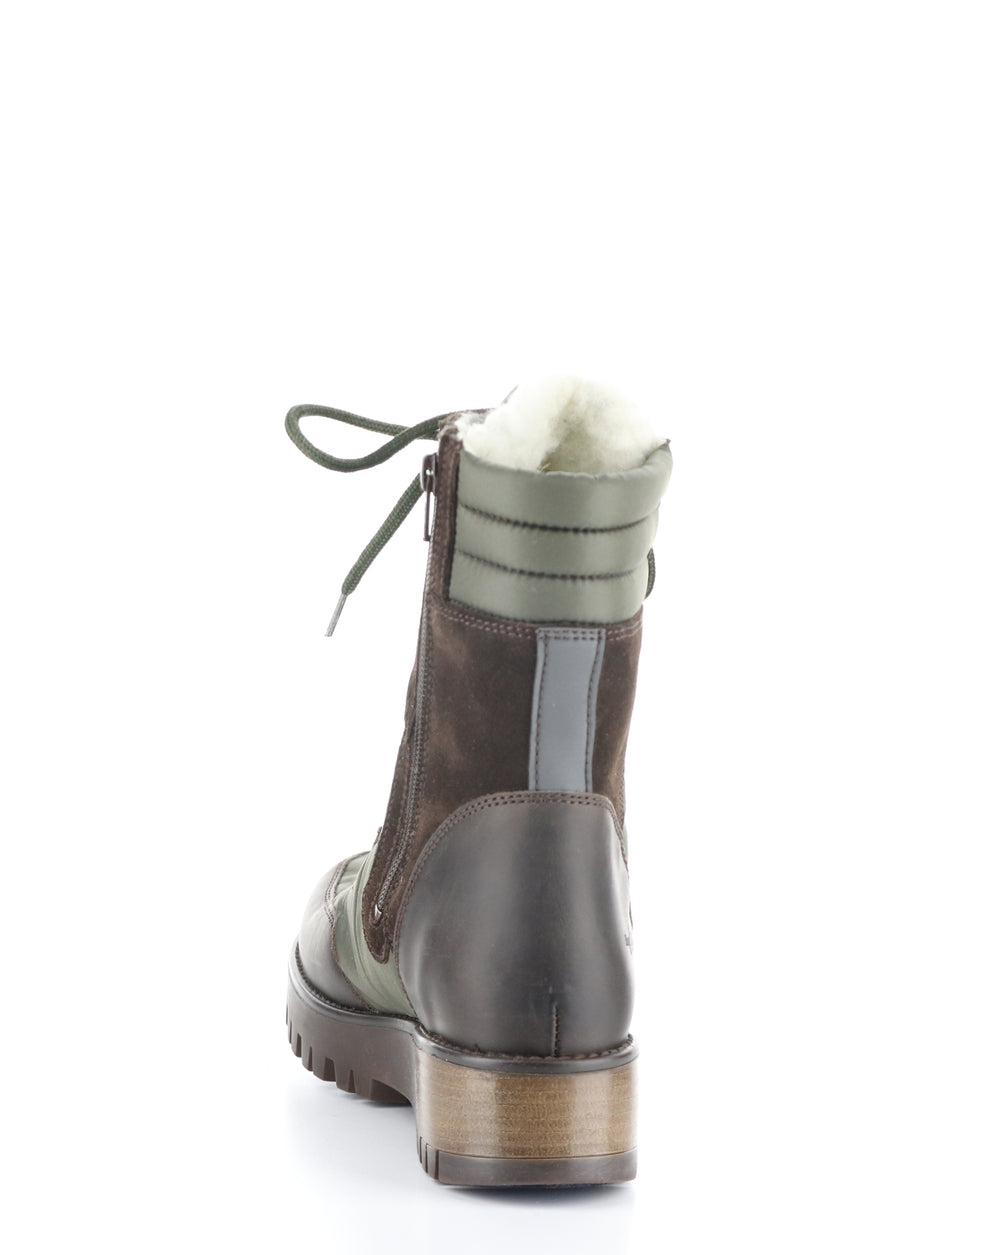 GREER PRIMA DK BROWN/OLIVE Round Toe Boots